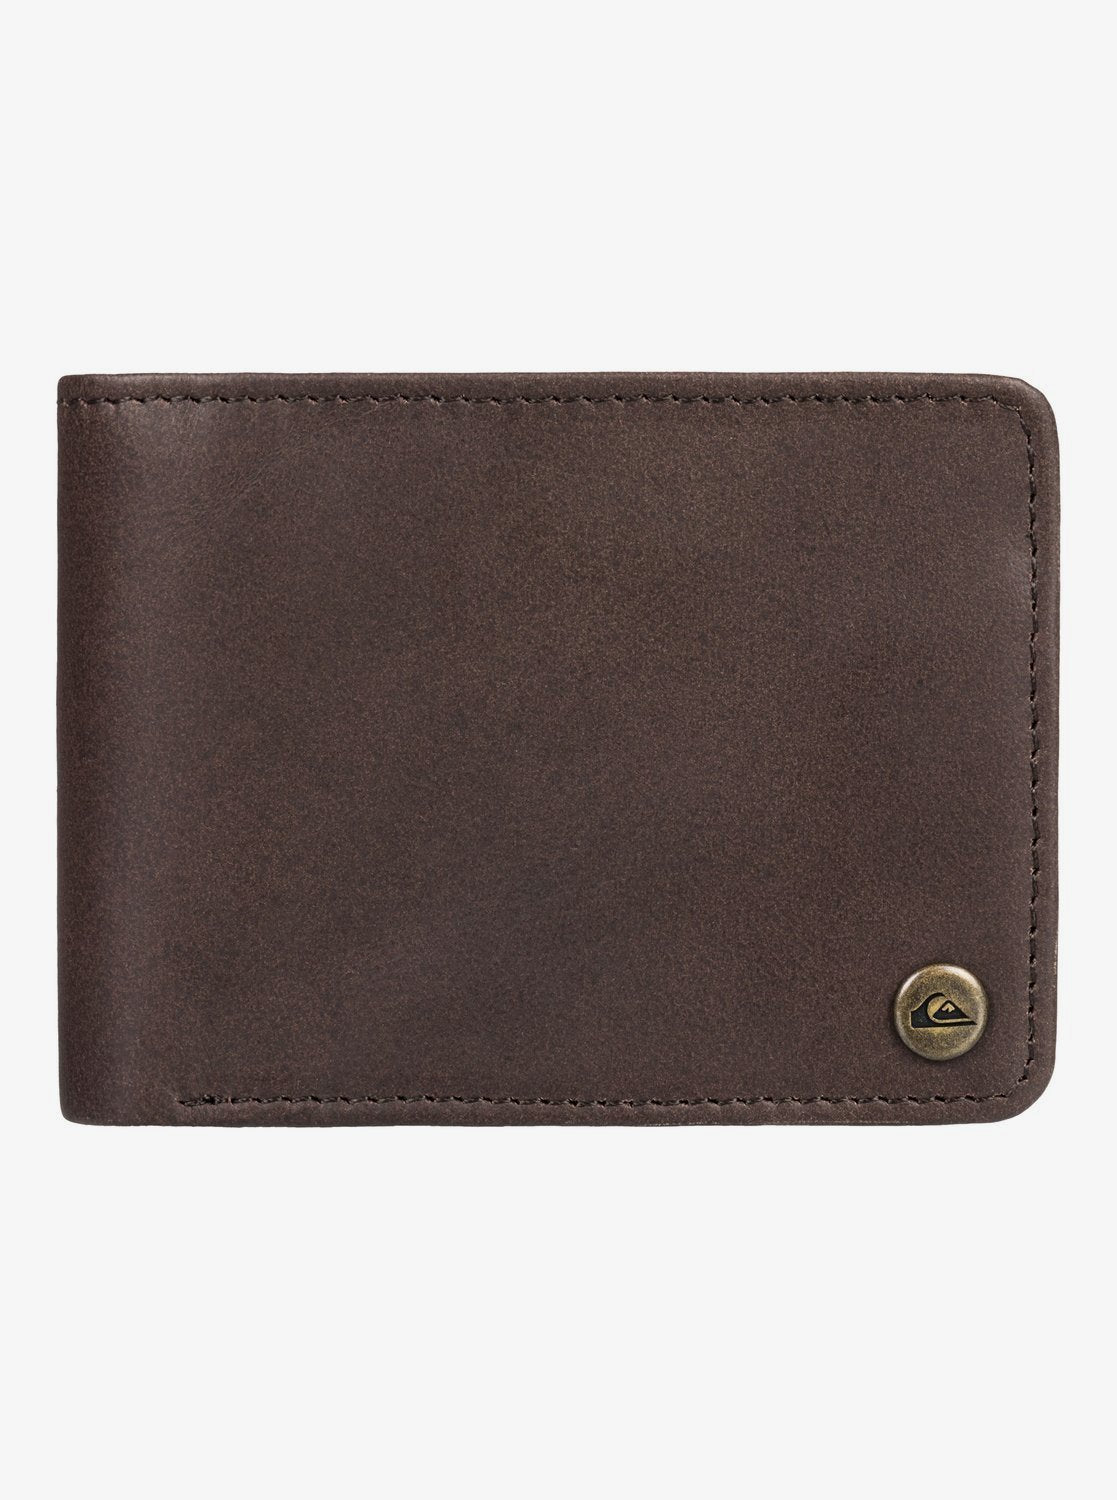 Quiksilver Mac Tri-Fold Leather Wallet Natural